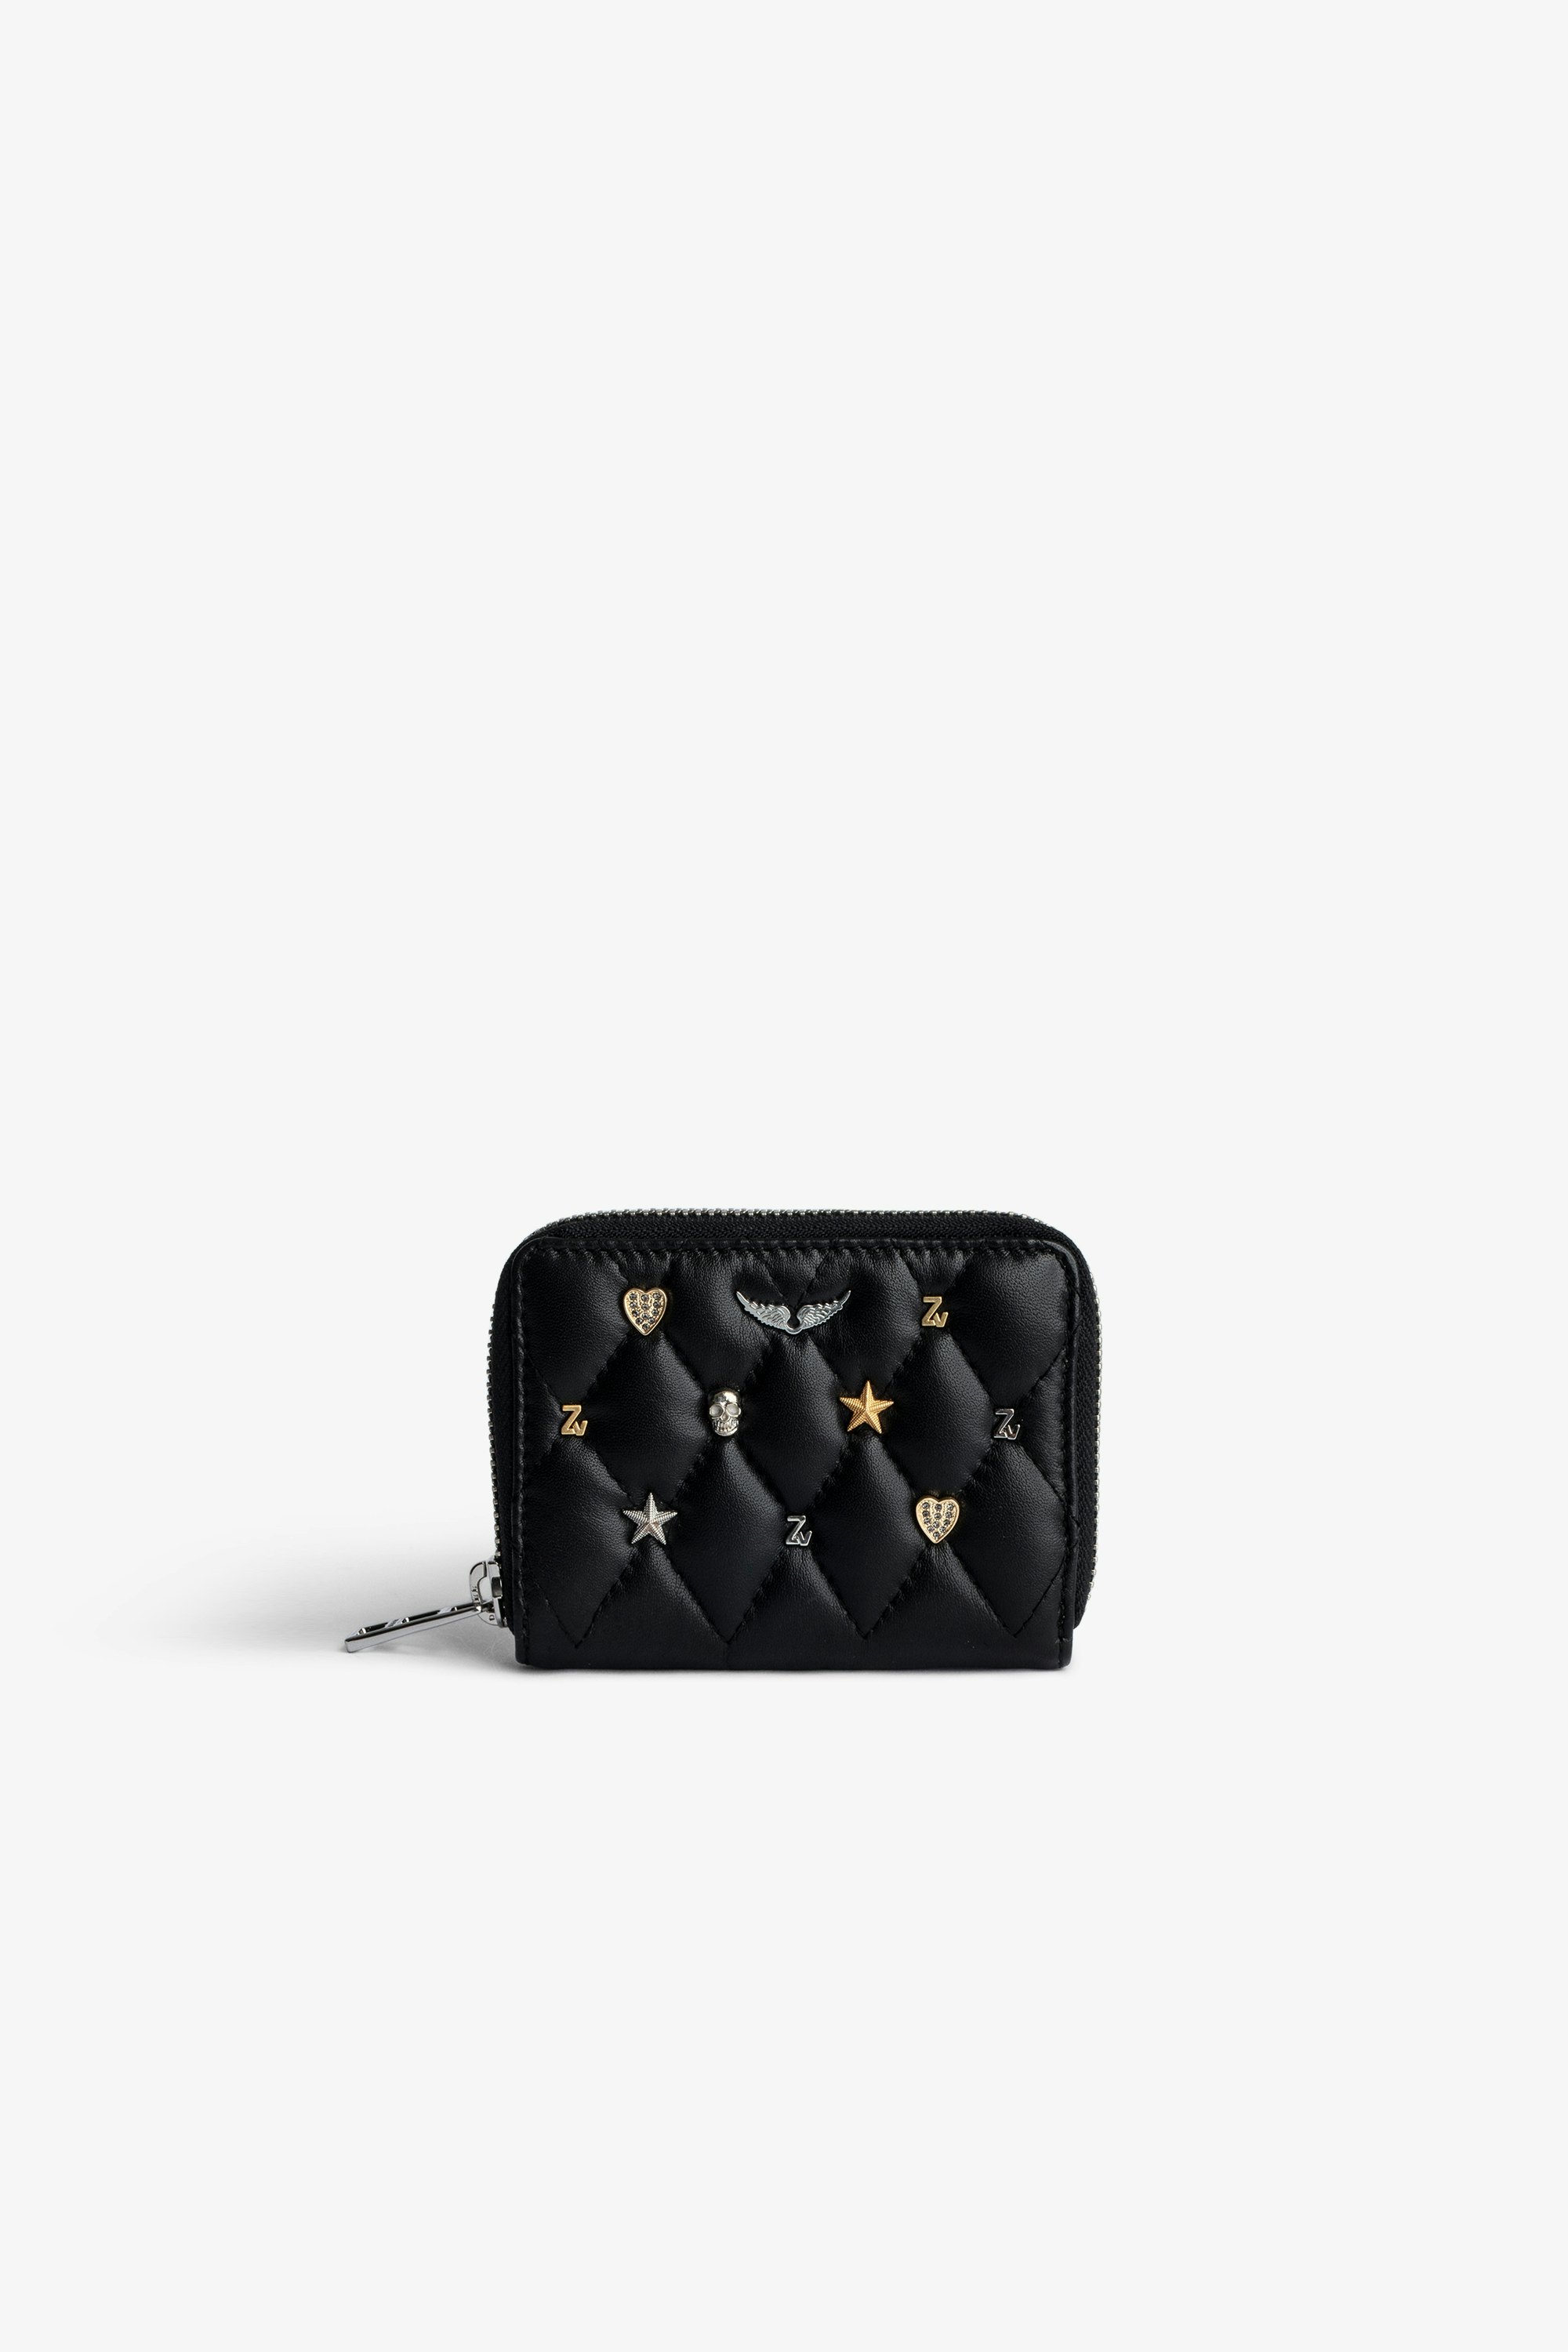 Mini ZV Coin Purse - Women’s black quilted leather coin purse with silver- and gold-tone charms